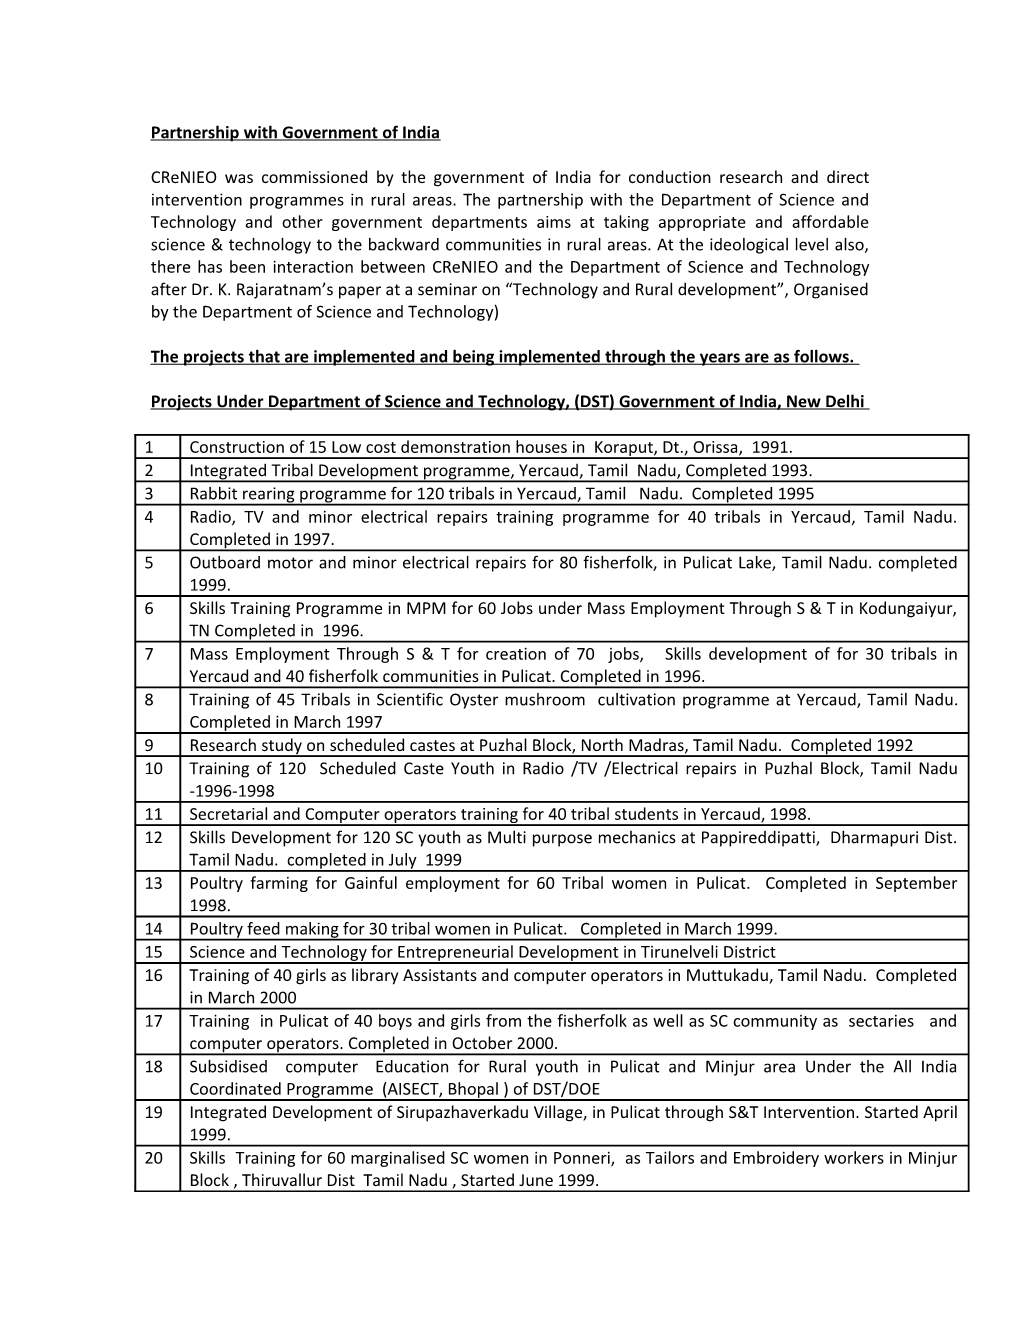 Projects Under Department of Science and Technology, Government of India, New Delhi